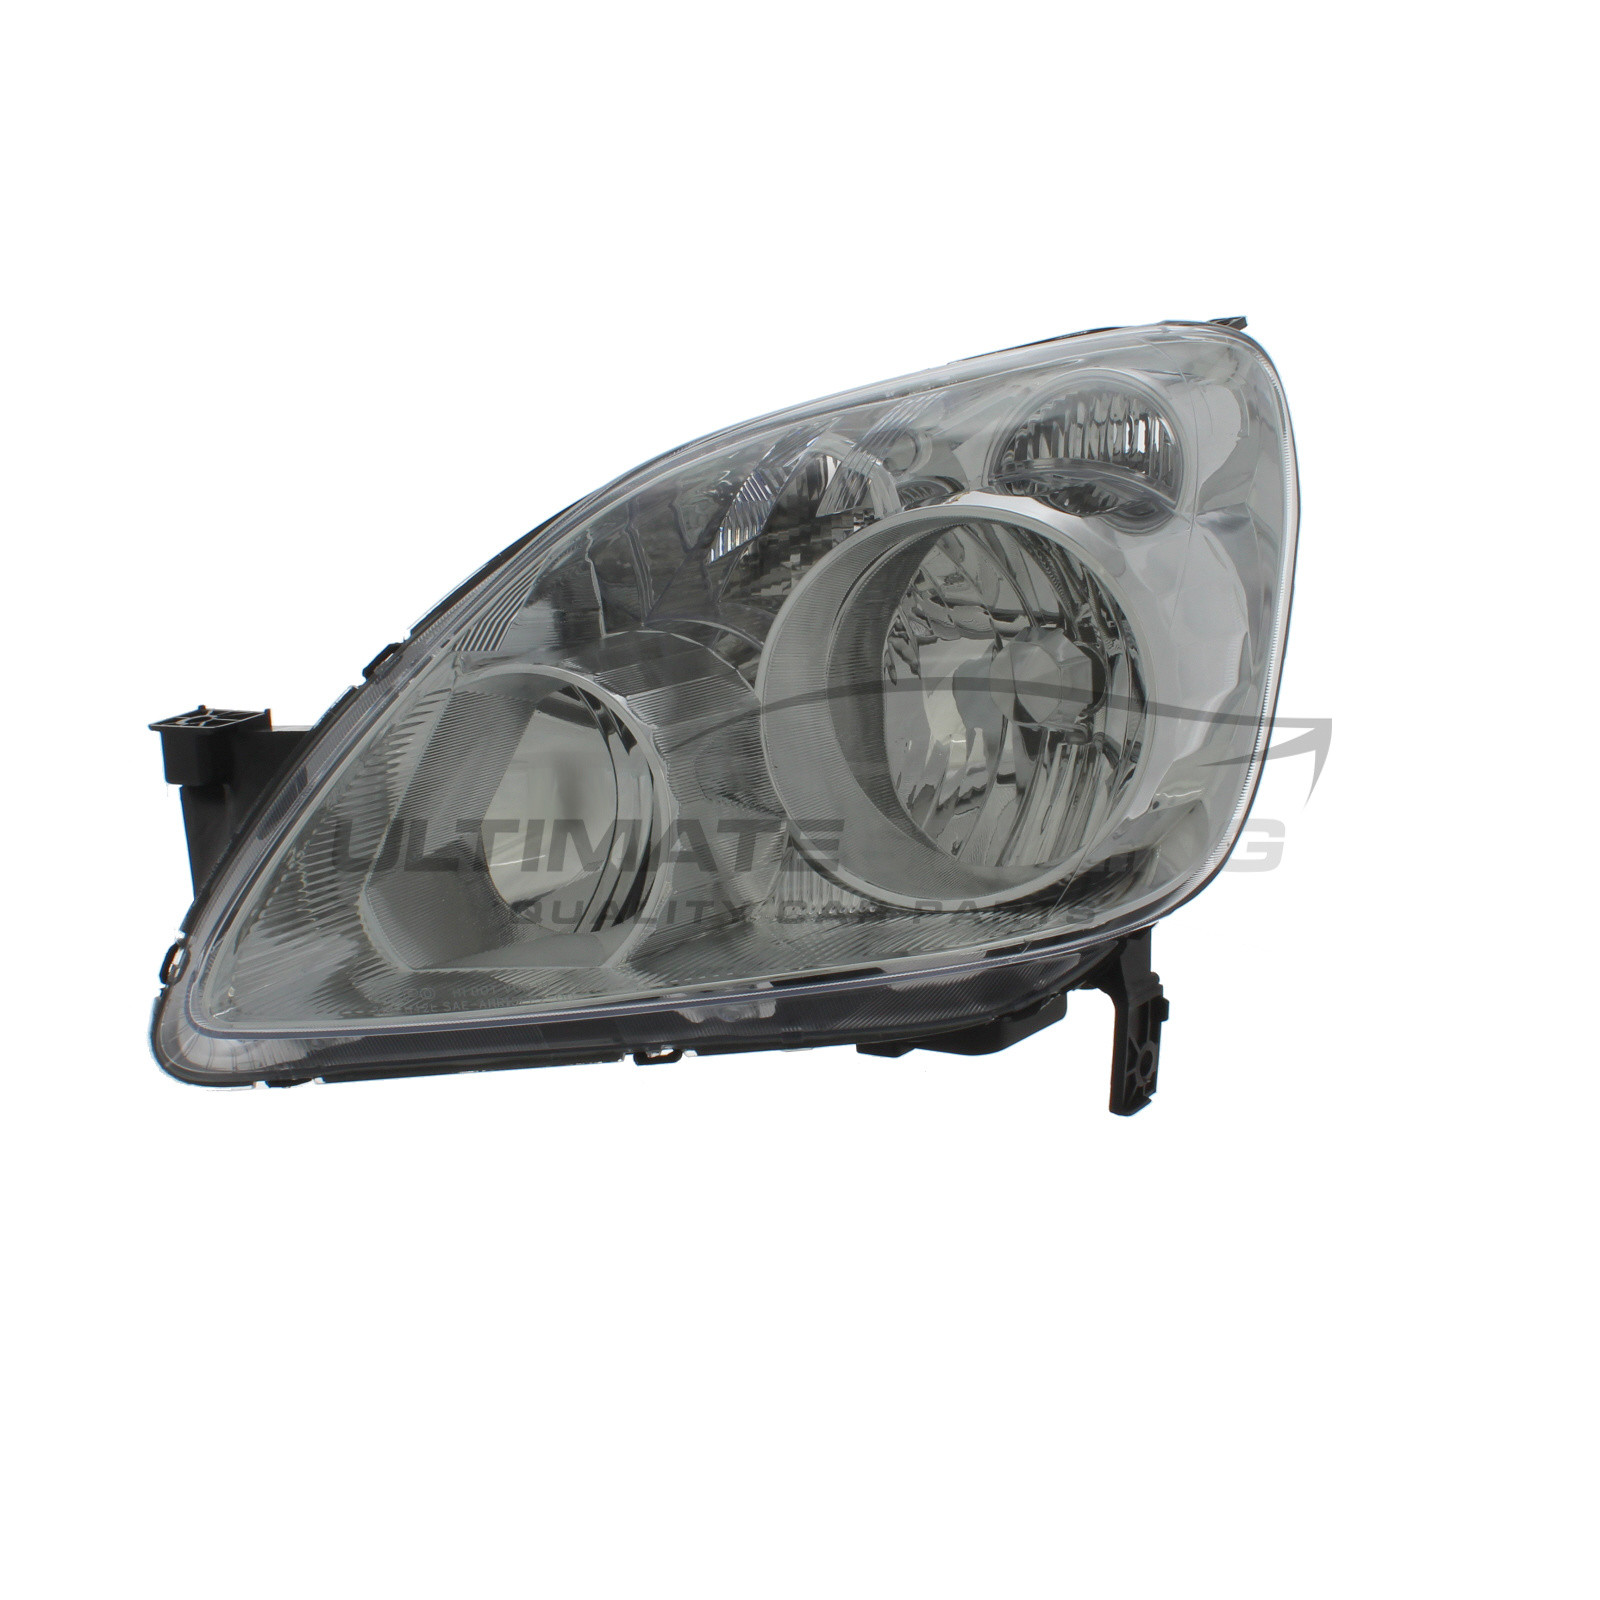 Honda CR-V 2005-2007 Halogen, Electric Without Motor, Chrome Headlight / Headlamp Including Clear Indicator Passengers Side (LH)